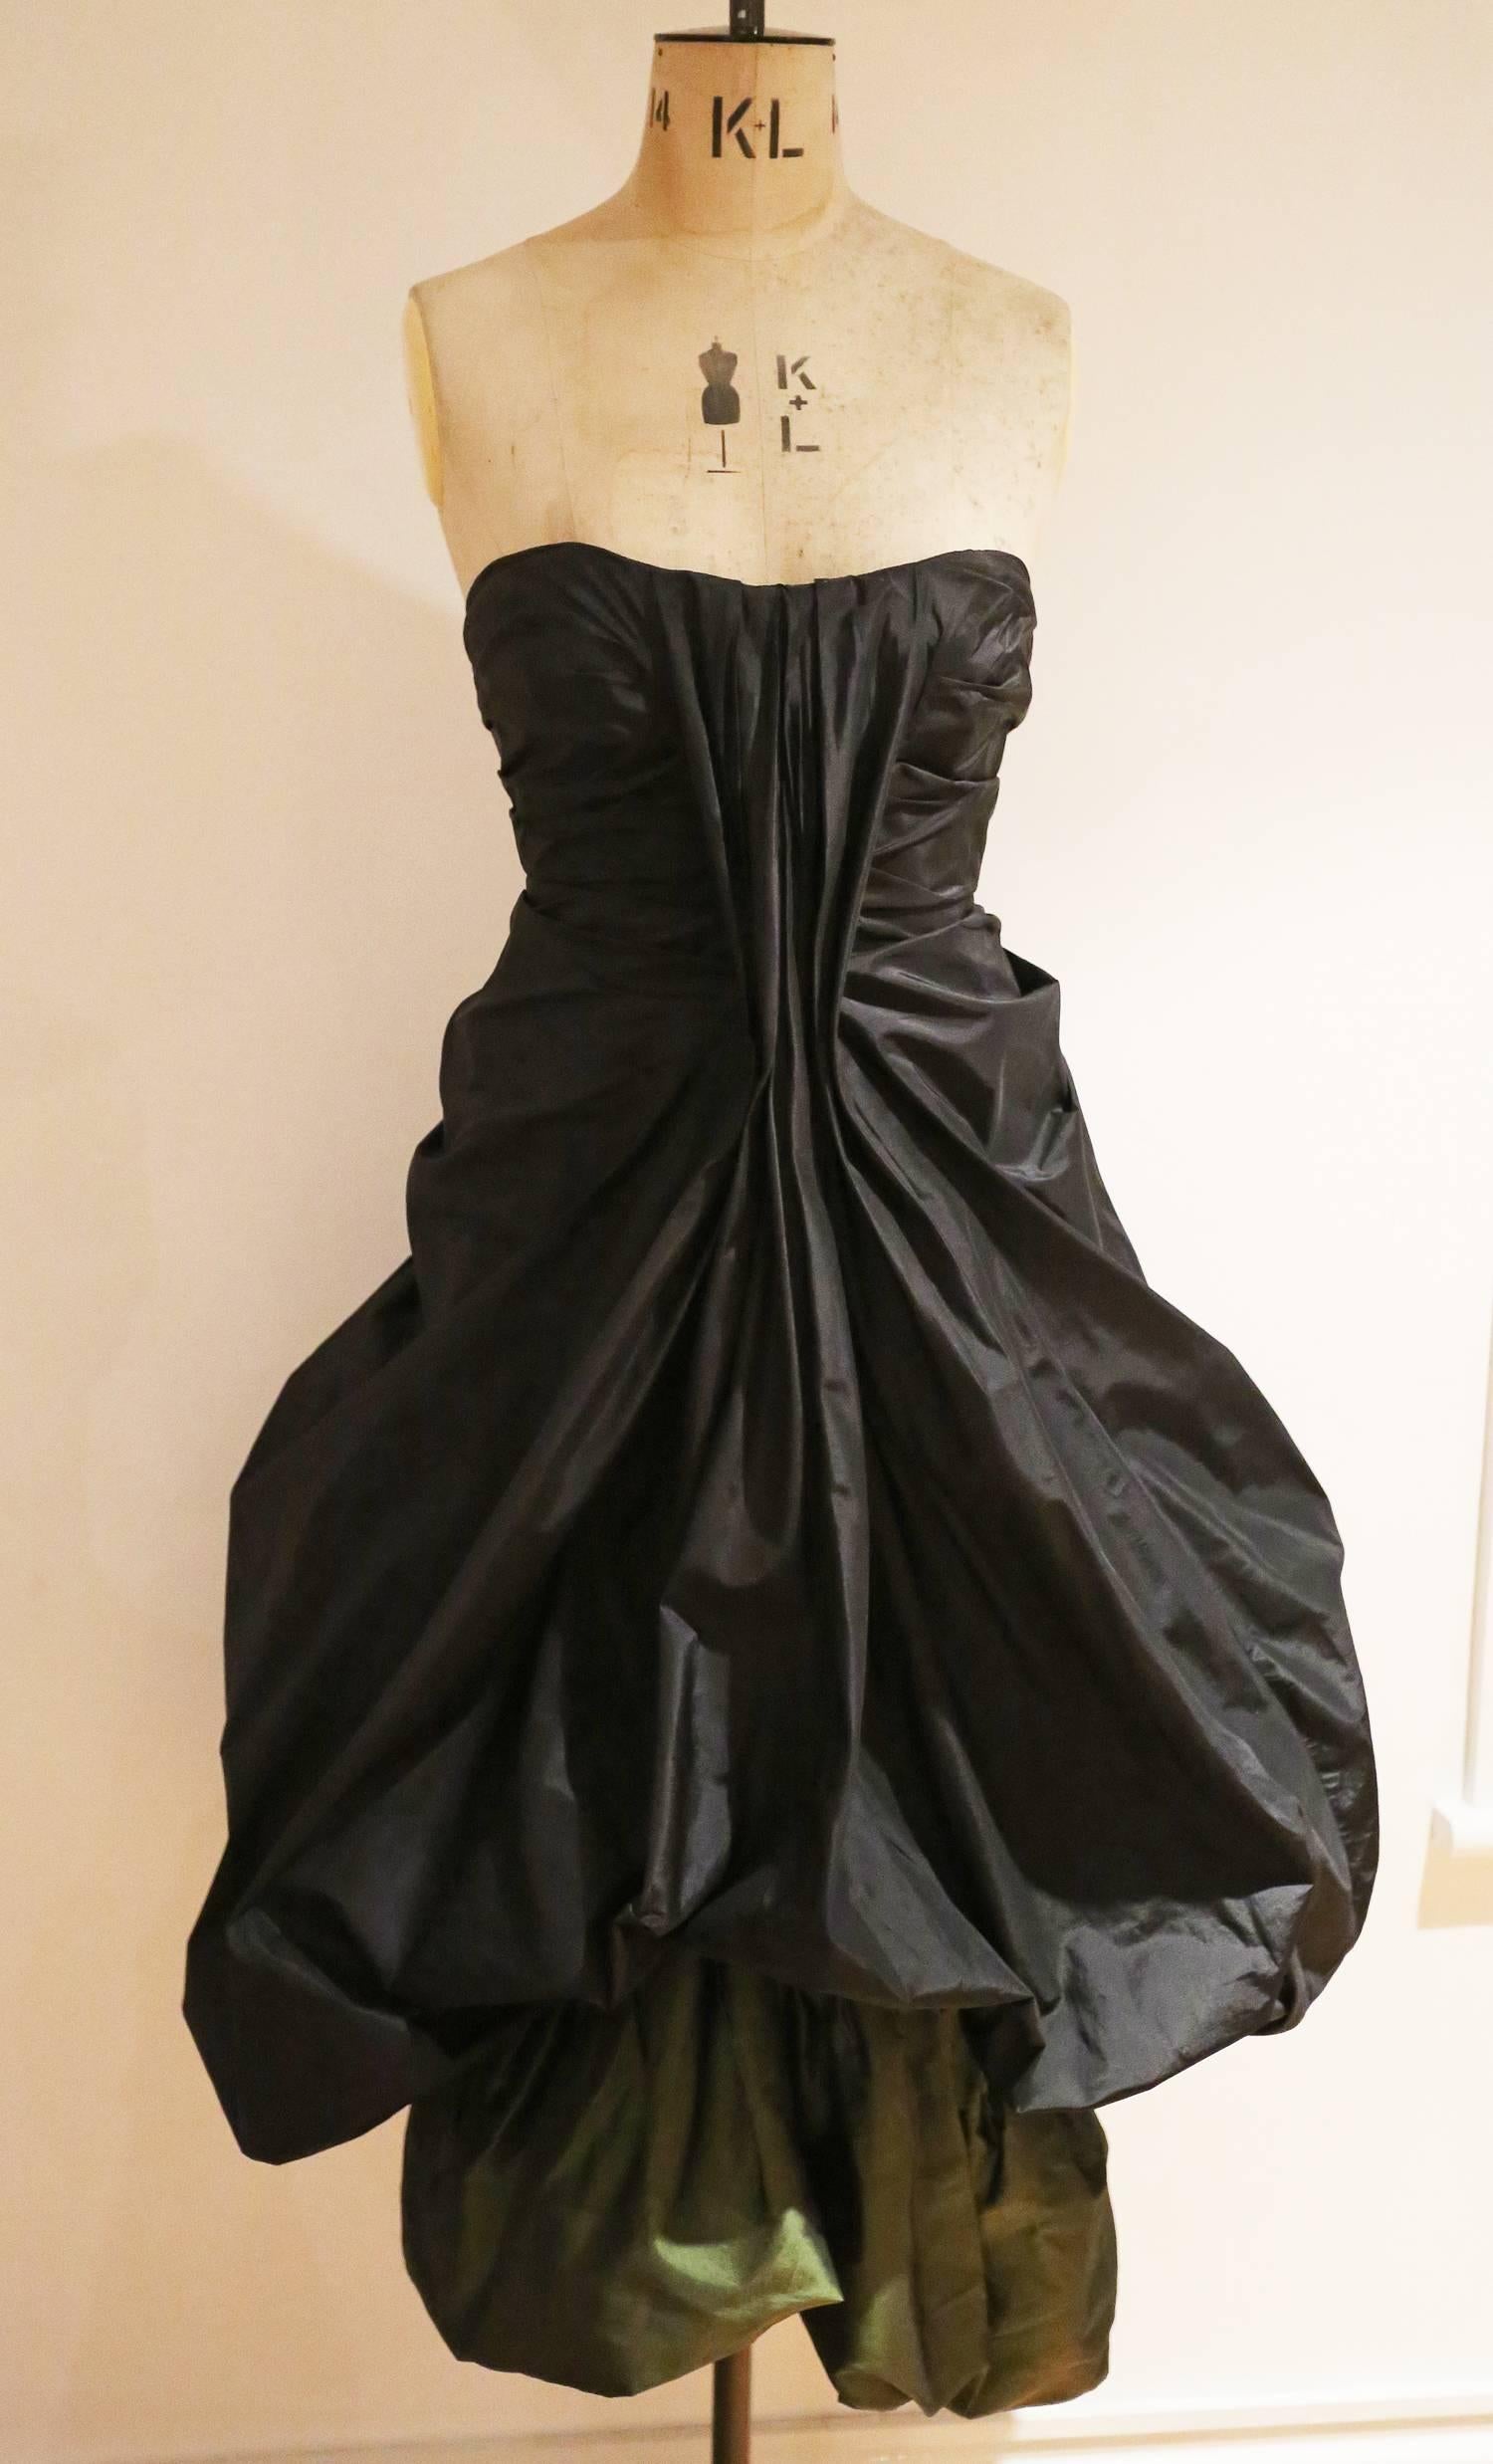 Extremely important and rare Alexander McQueen strapless silk taffeta evening dress from the witches collection, Autumn-Winter 2007. The dress features beautiful pleating throughout with an amazing ballon skirt and petrol green underskirt. There is